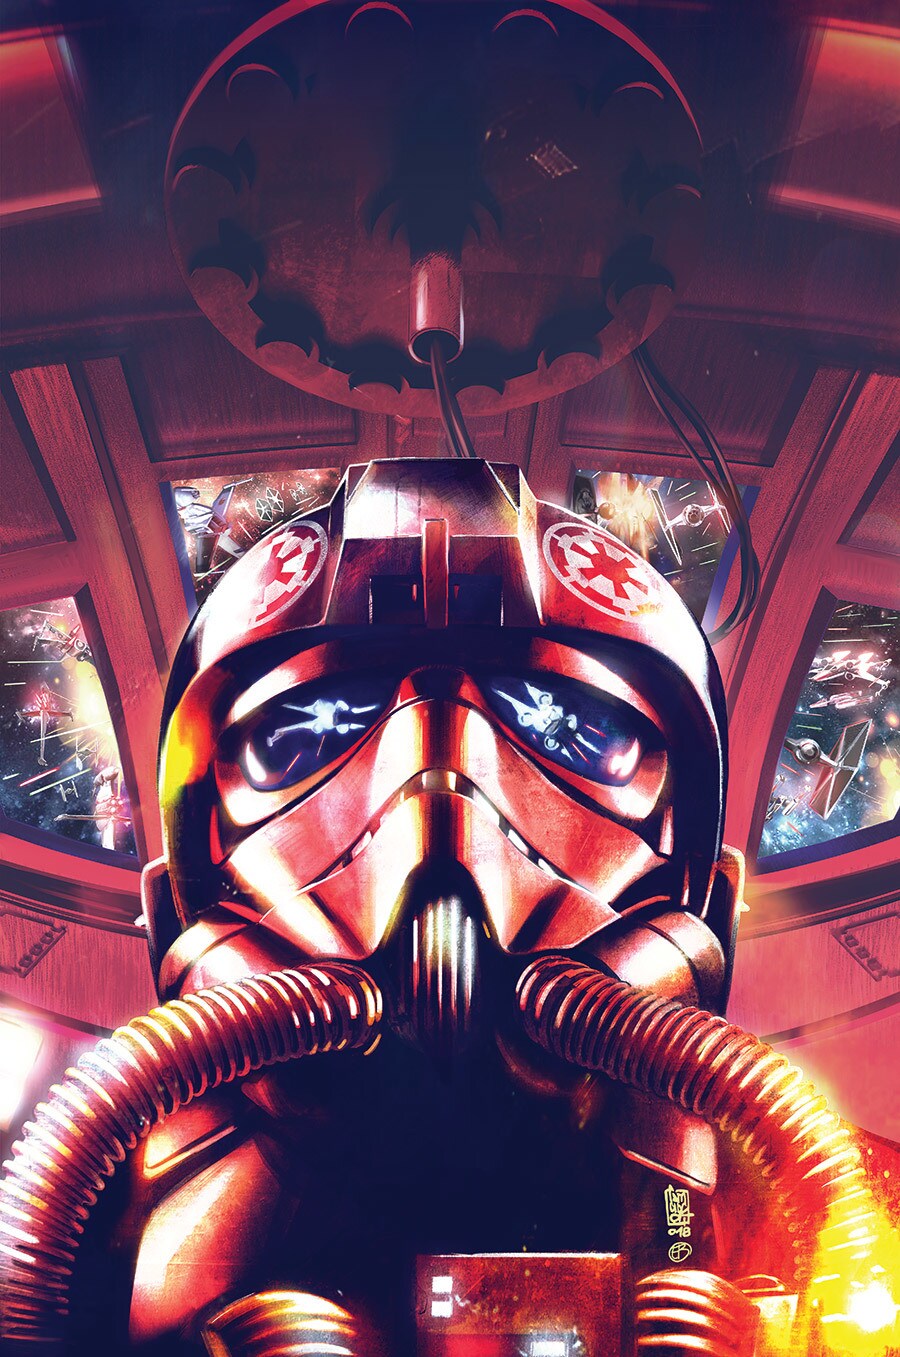 Cover art of Star Wars: TIE Fighter issue 1.